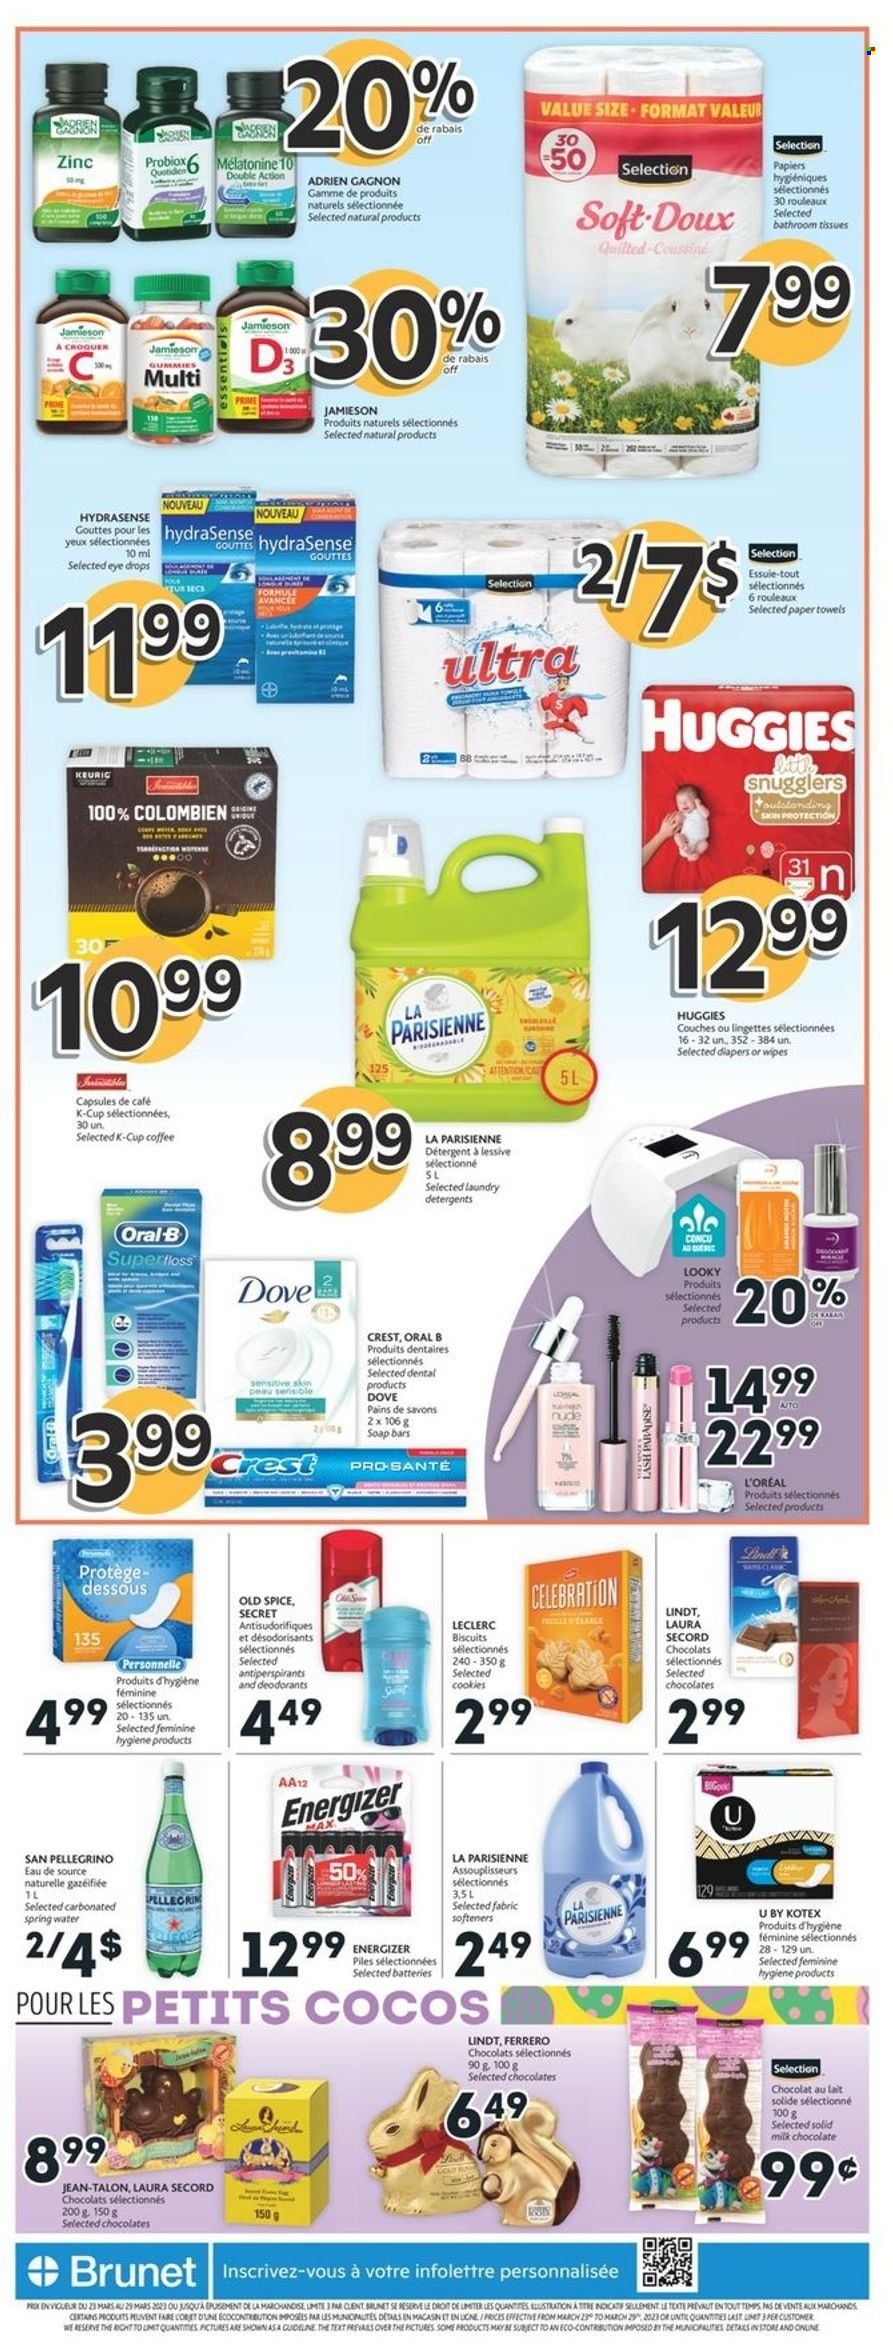 thumbnail - Brunet Flyer - March 23, 2023 - March 29, 2023 - Sales products - cookies, Dove, milk chocolate, chocolate, Mars, Celebration, biscuit, spring water, San Pellegrino, water, coffee, coffee capsules, K-Cups, wipes, nappies, toilet paper, tissues, kitchen towels, paper towels, soap, Crest, Kotex, L’Oréal, battery, eye drops, zinc, detergent, Energizer, Huggies, Old Spice, Oral-B, Lindt, Ferrero Rocher, deodorant. Page 2.